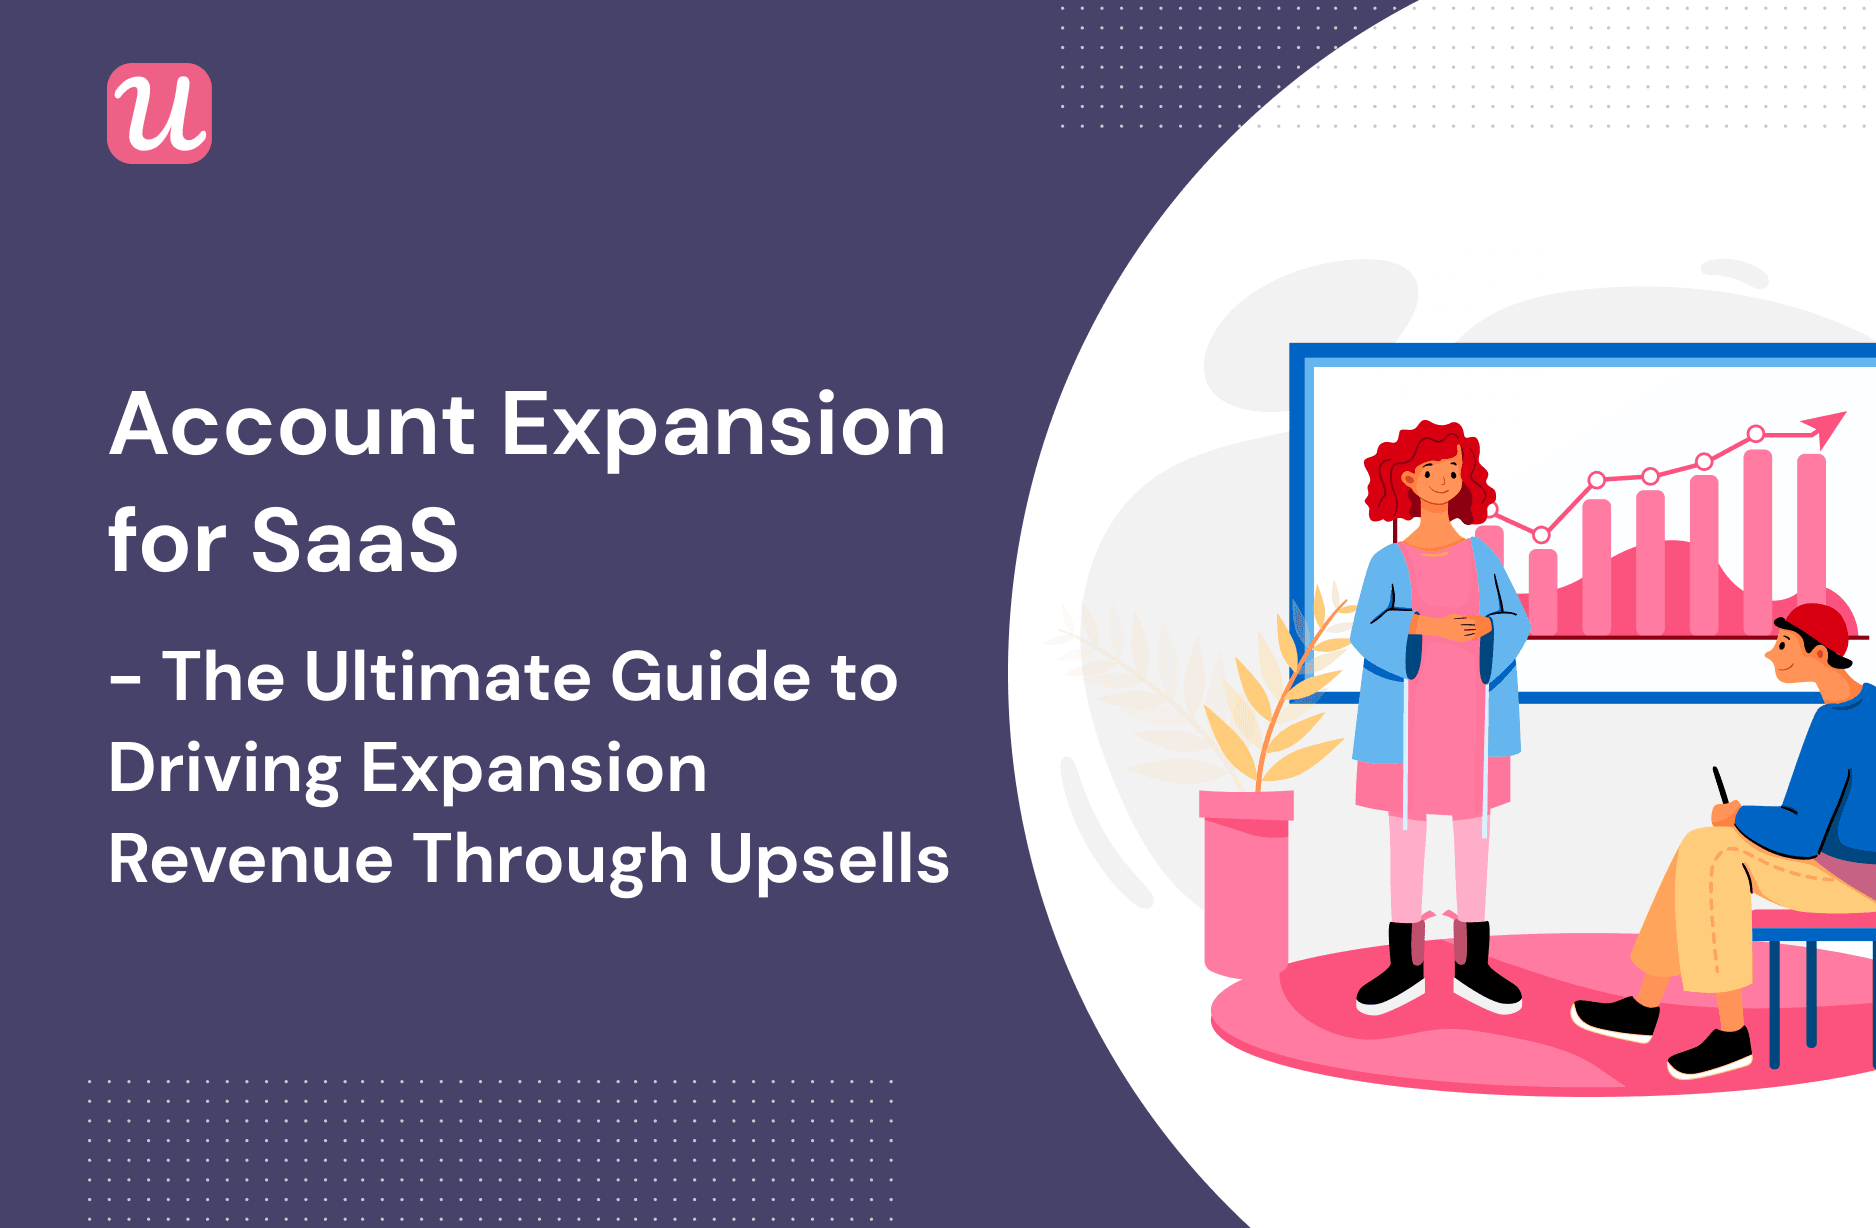 Account Expansion for SaaS - The Ultimate Guide To Driving Expansion and Revenue Through Upsells